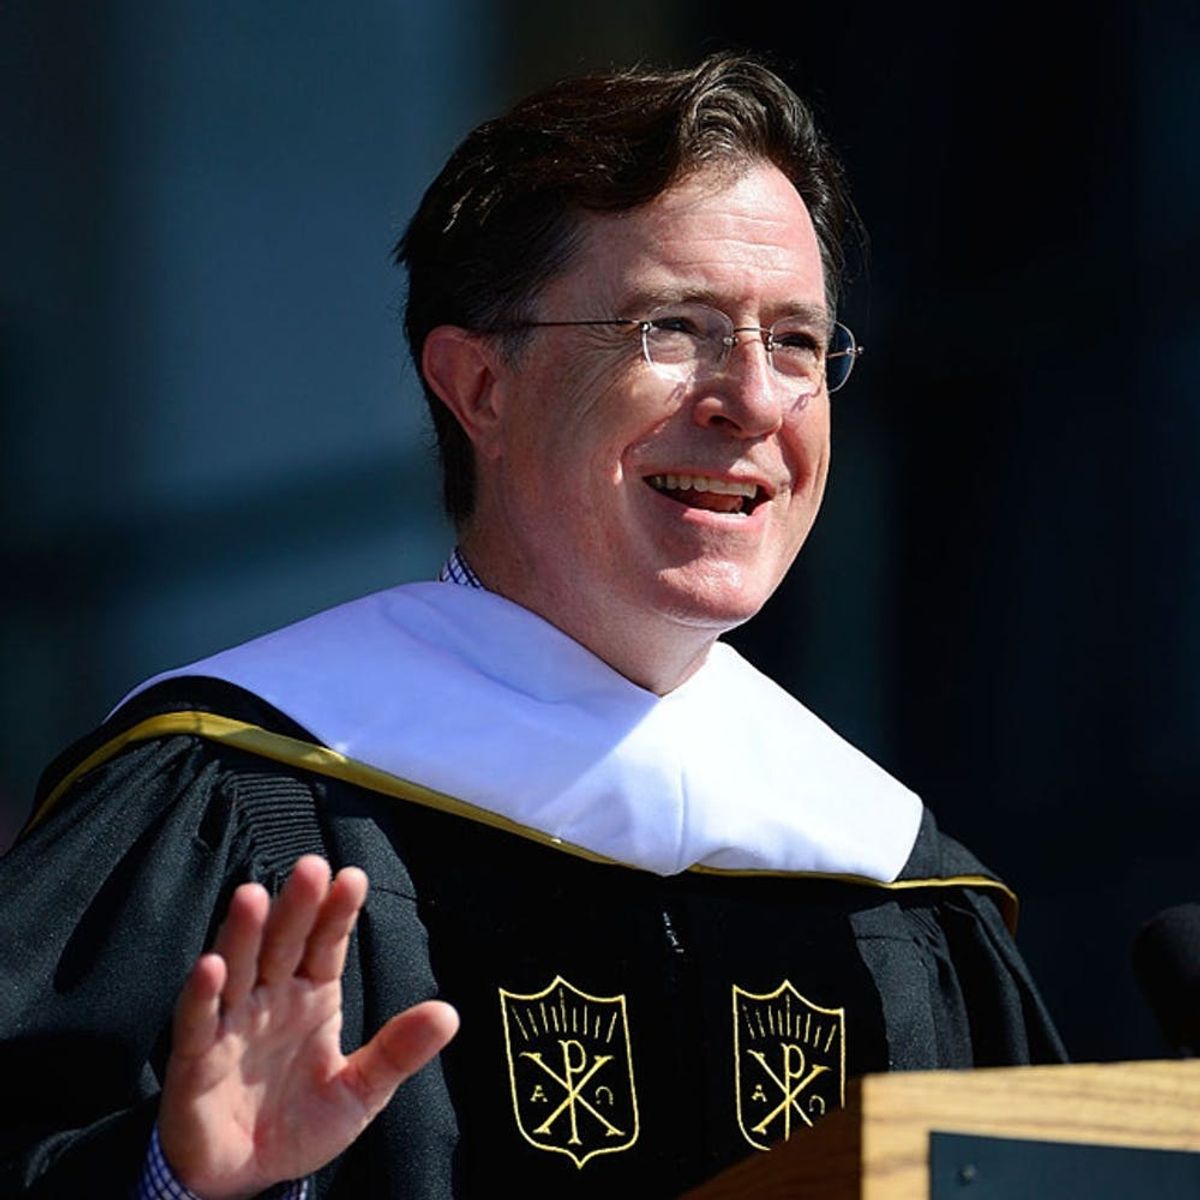 8 Inspiring Celeb Commencement Speeches That Apply to Everyone